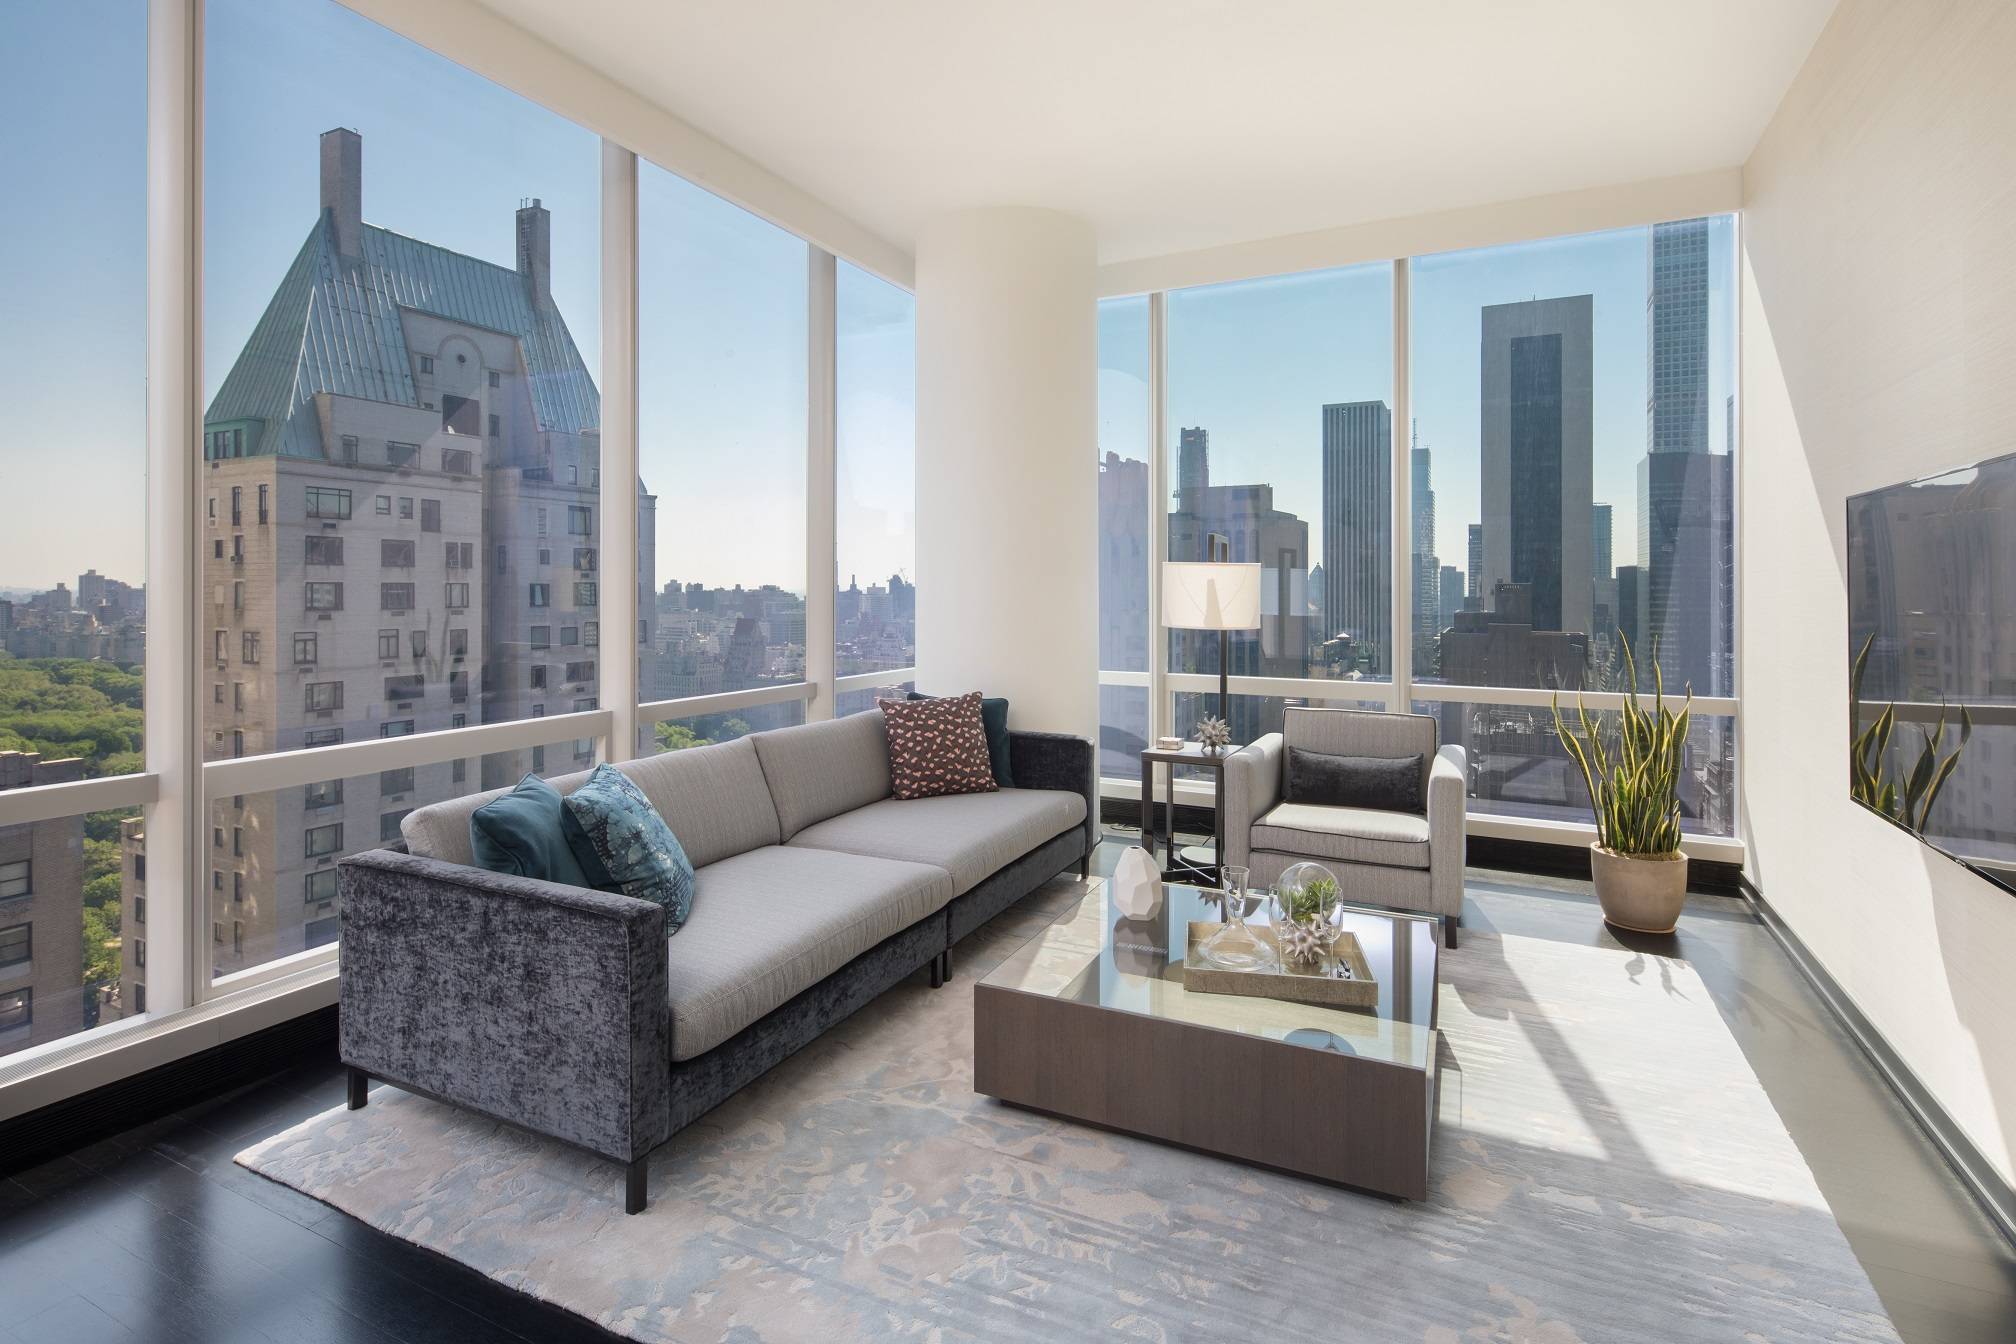 Fully furnished, move in ready, a true turn key residential experience inside the ultra luxurious One57 condominium.